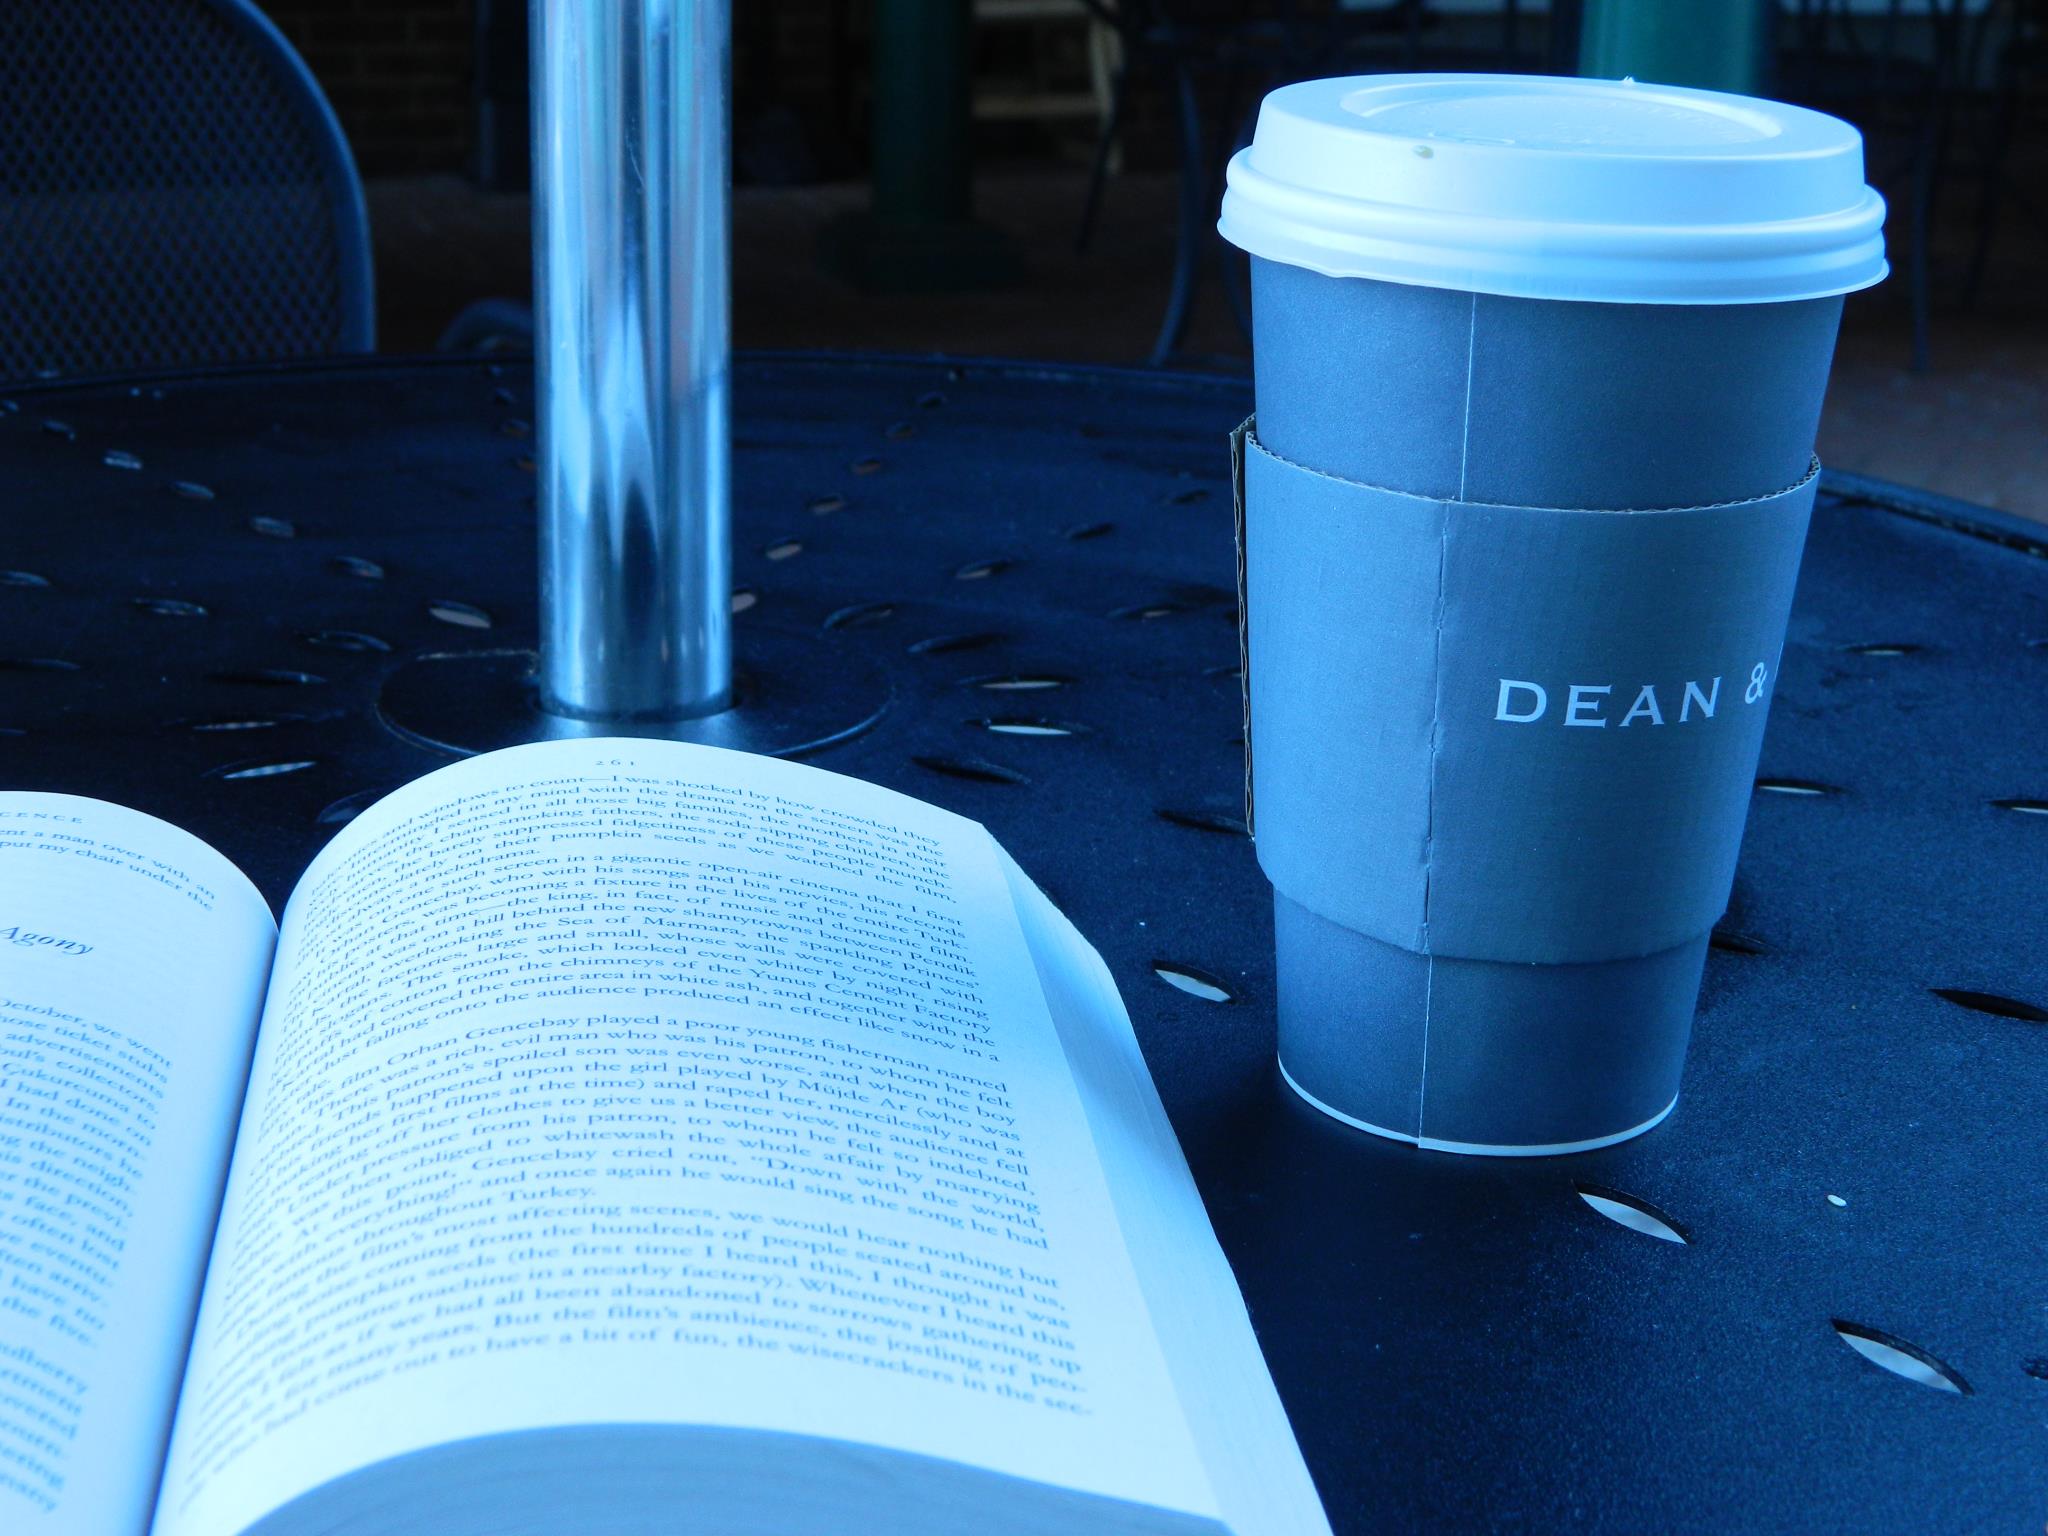 A Book and Coffee